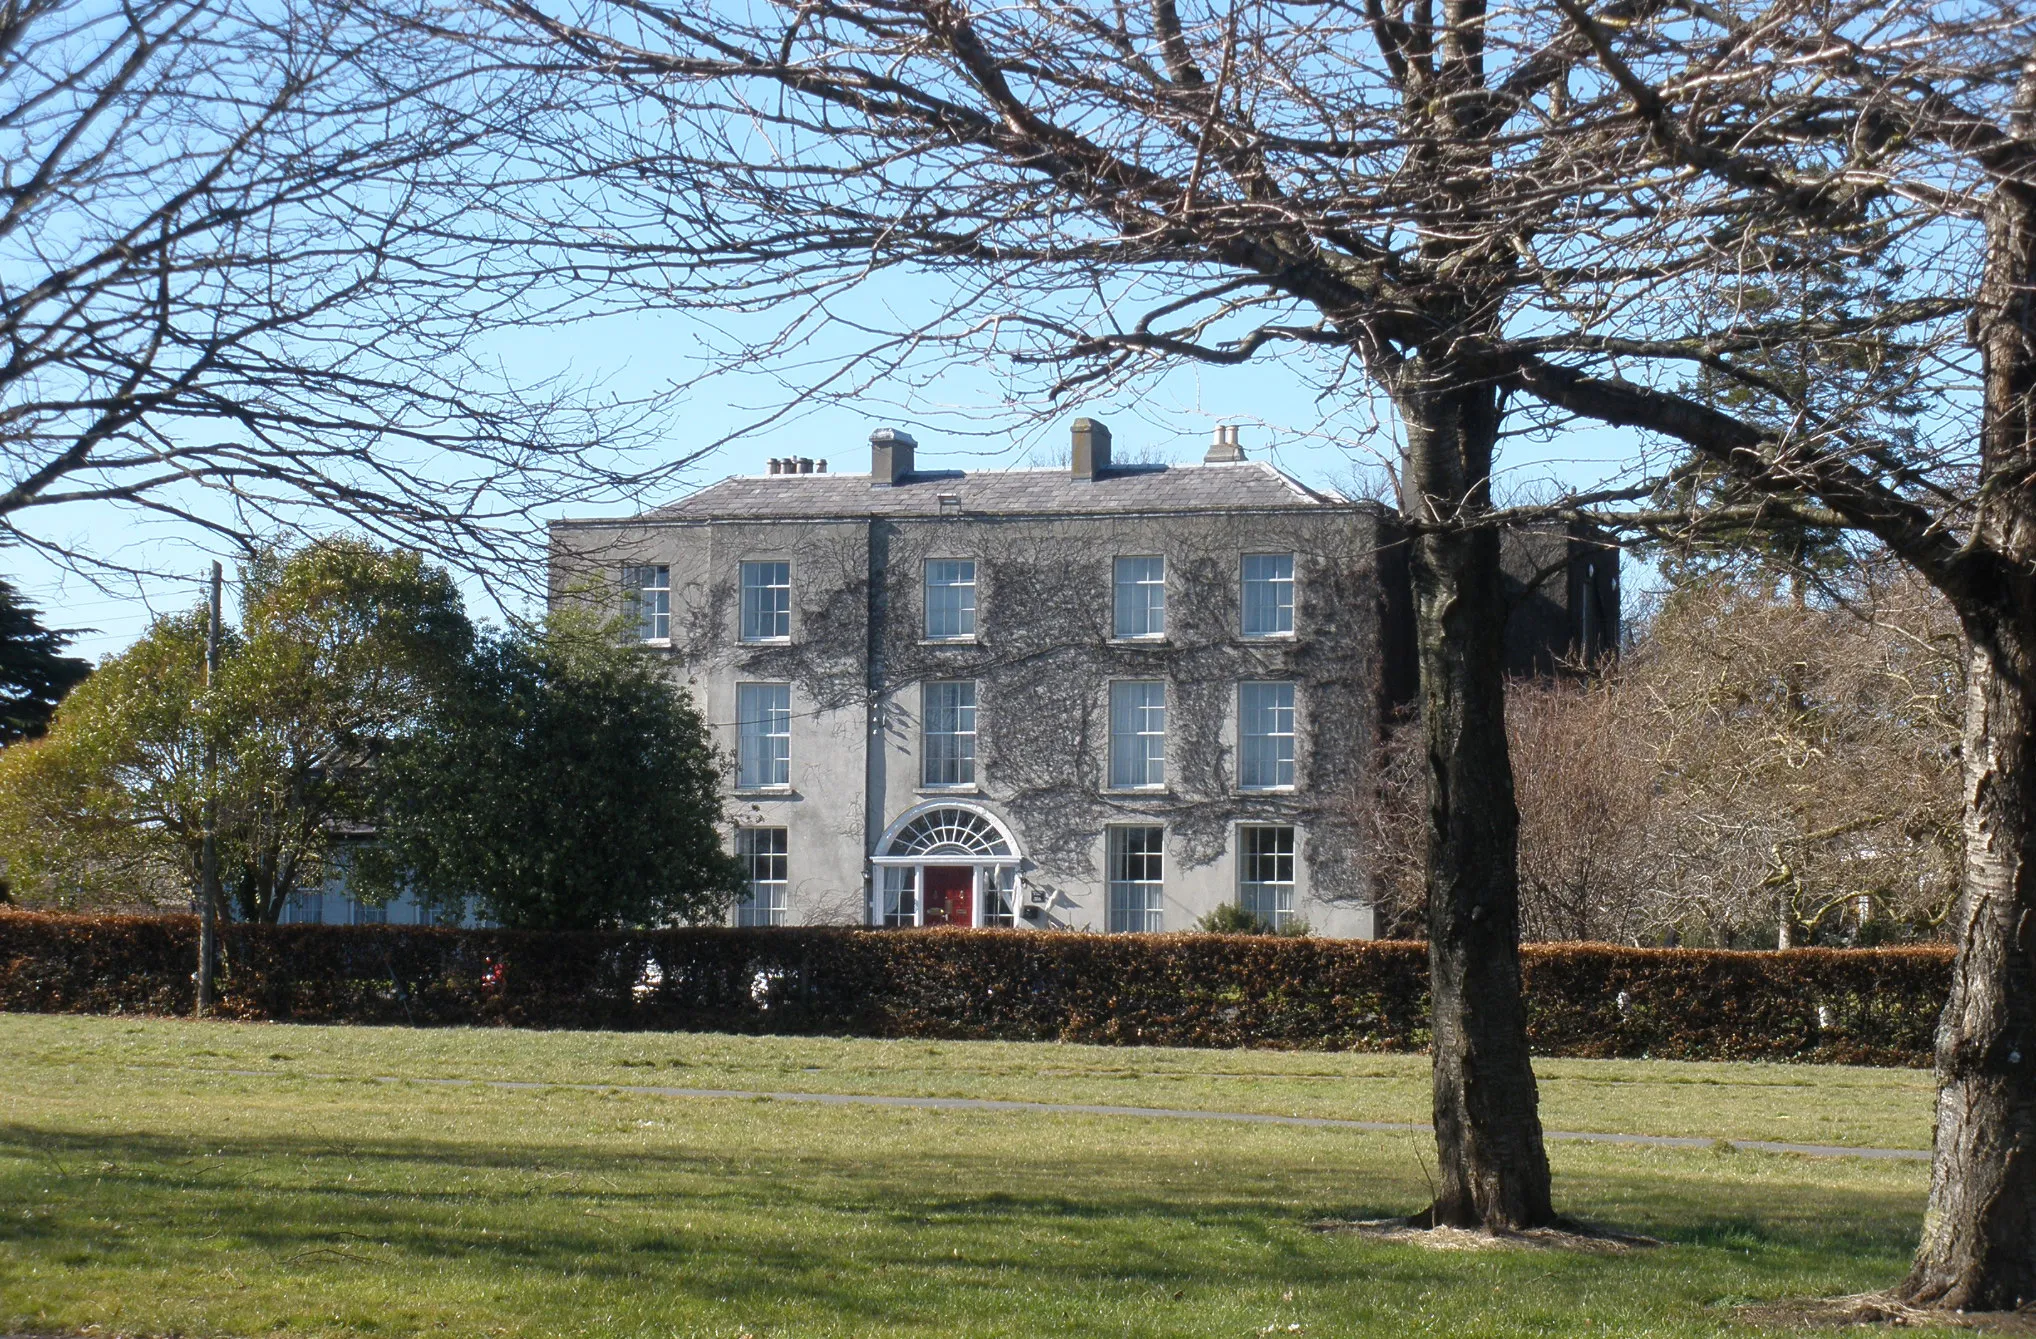 Photo showing: Cypress Grove House, built about 1740, on Cypress Grove Road in Templeogue, Dublin, Ireland, occupied by the White Fathers